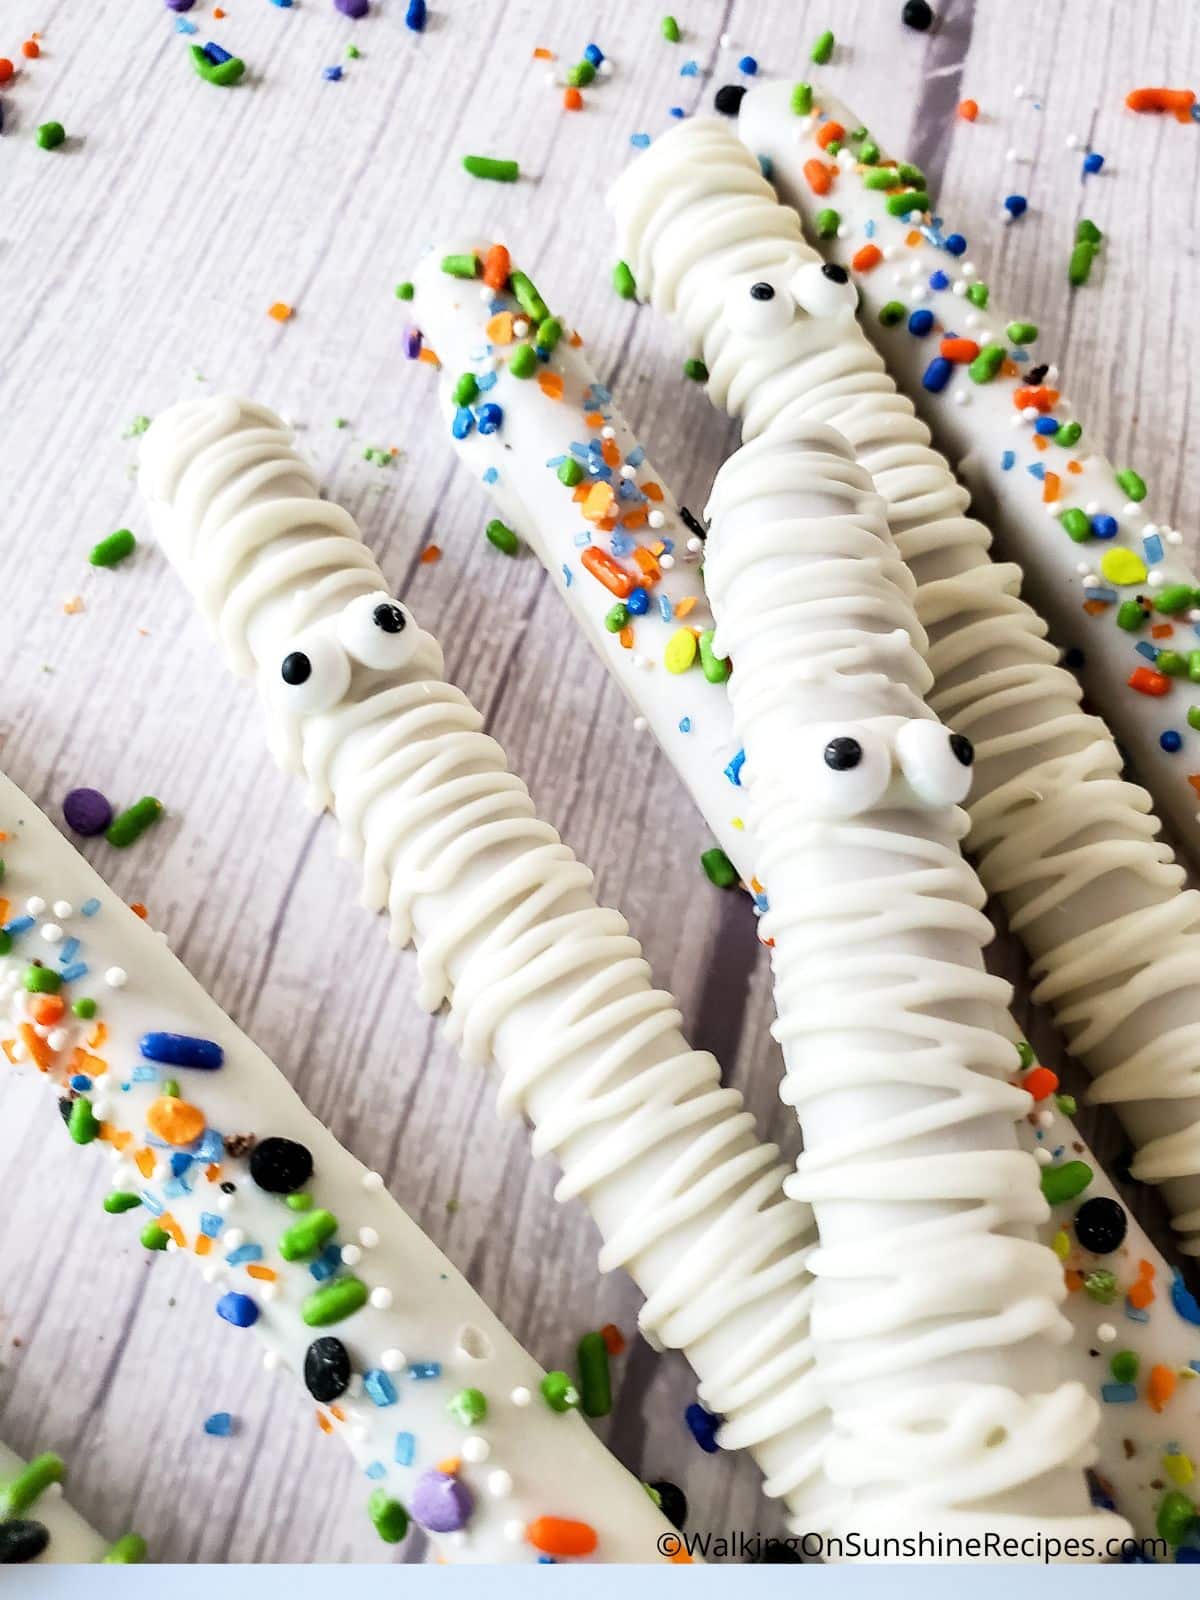 sprinkles and candy eyes on chocolate covered pretzels.